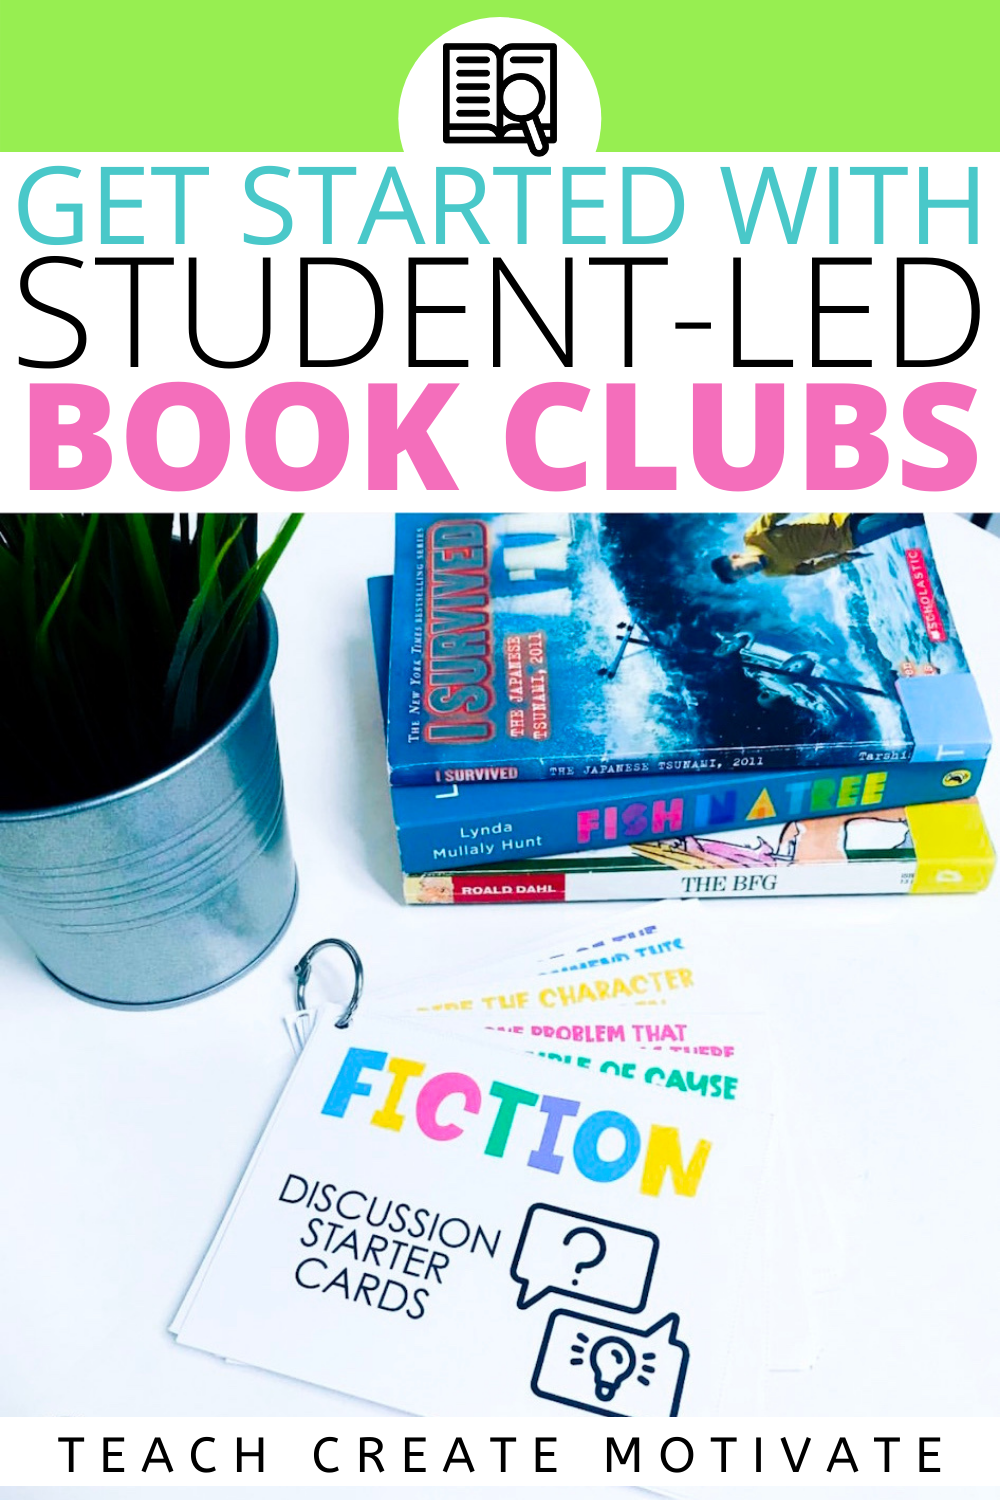 Get Started with Student-Led Book Clubs - Teach Create Motivate